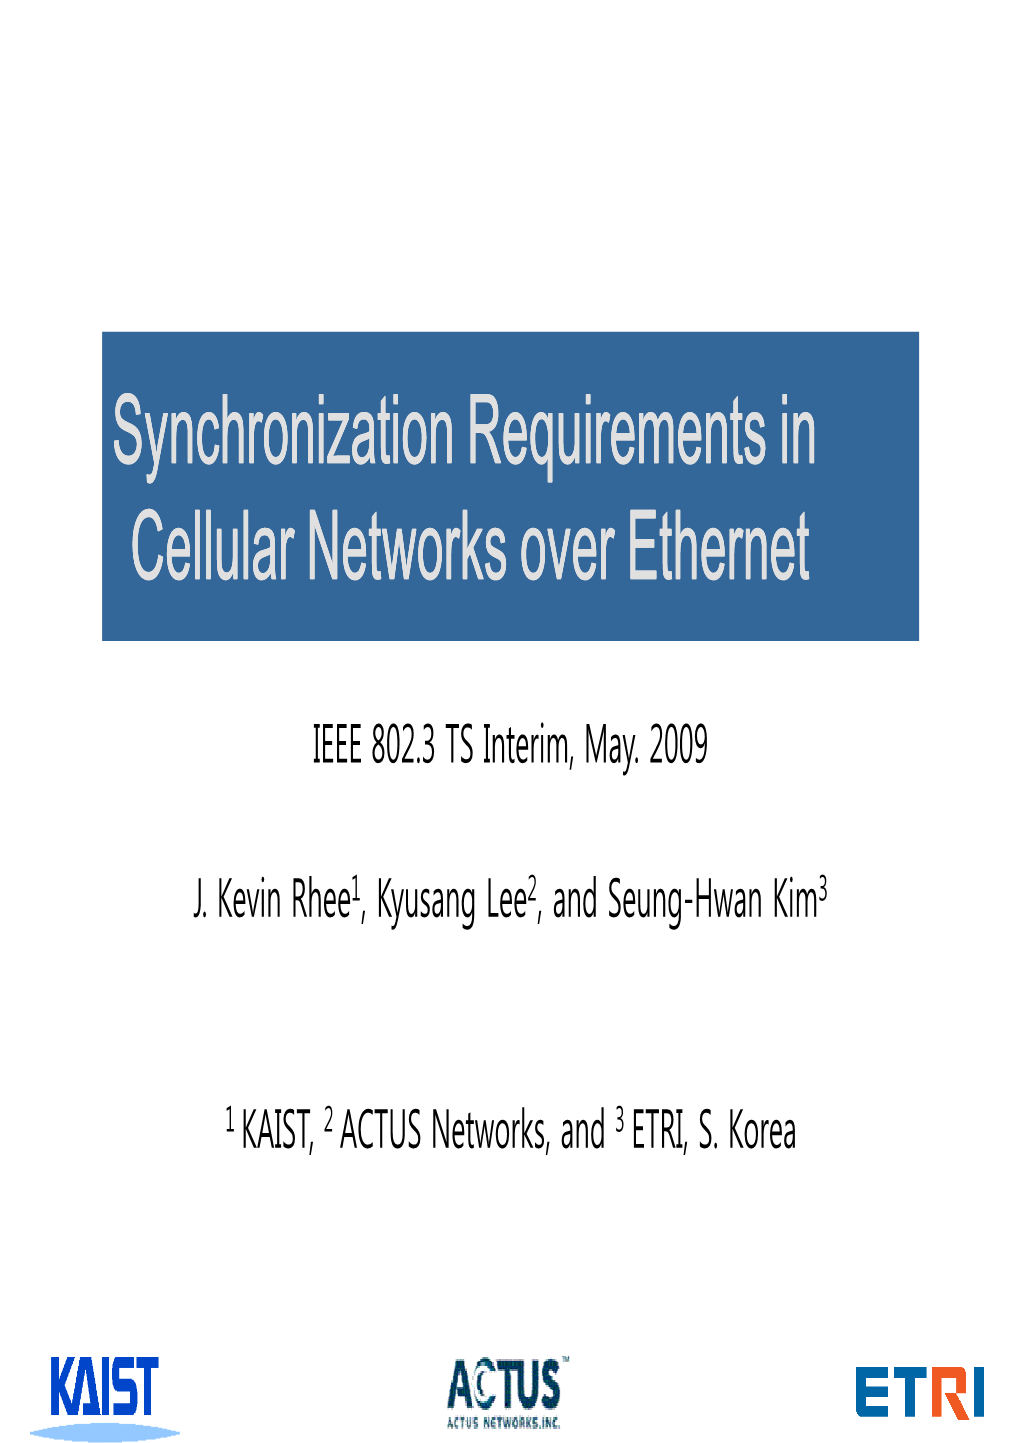 Synchronization Requirements in Cellular Networks Over Ethernet